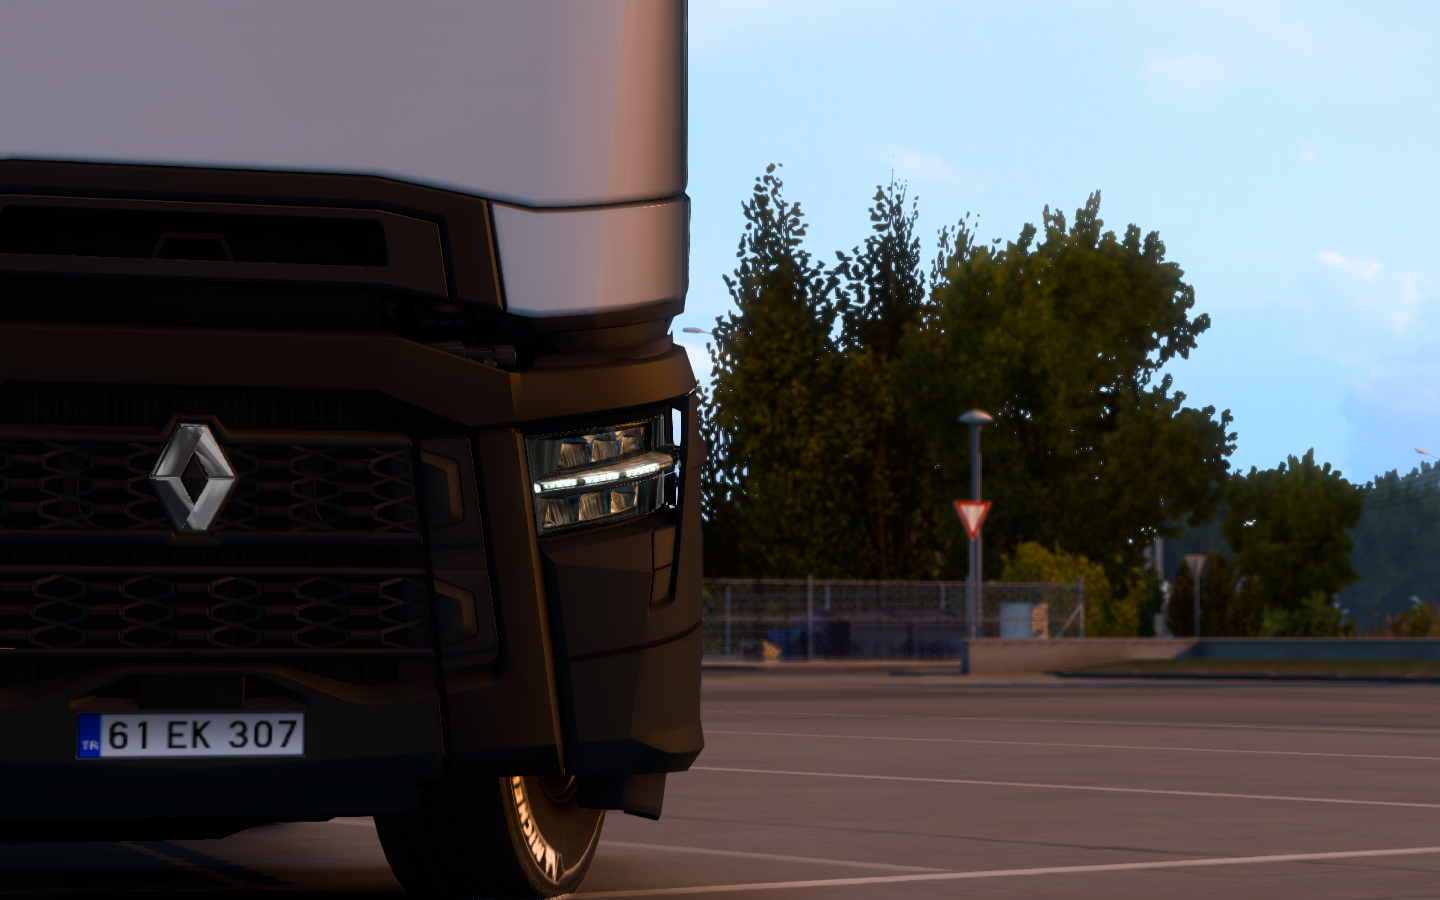 ets2_20210407_231511_00.png